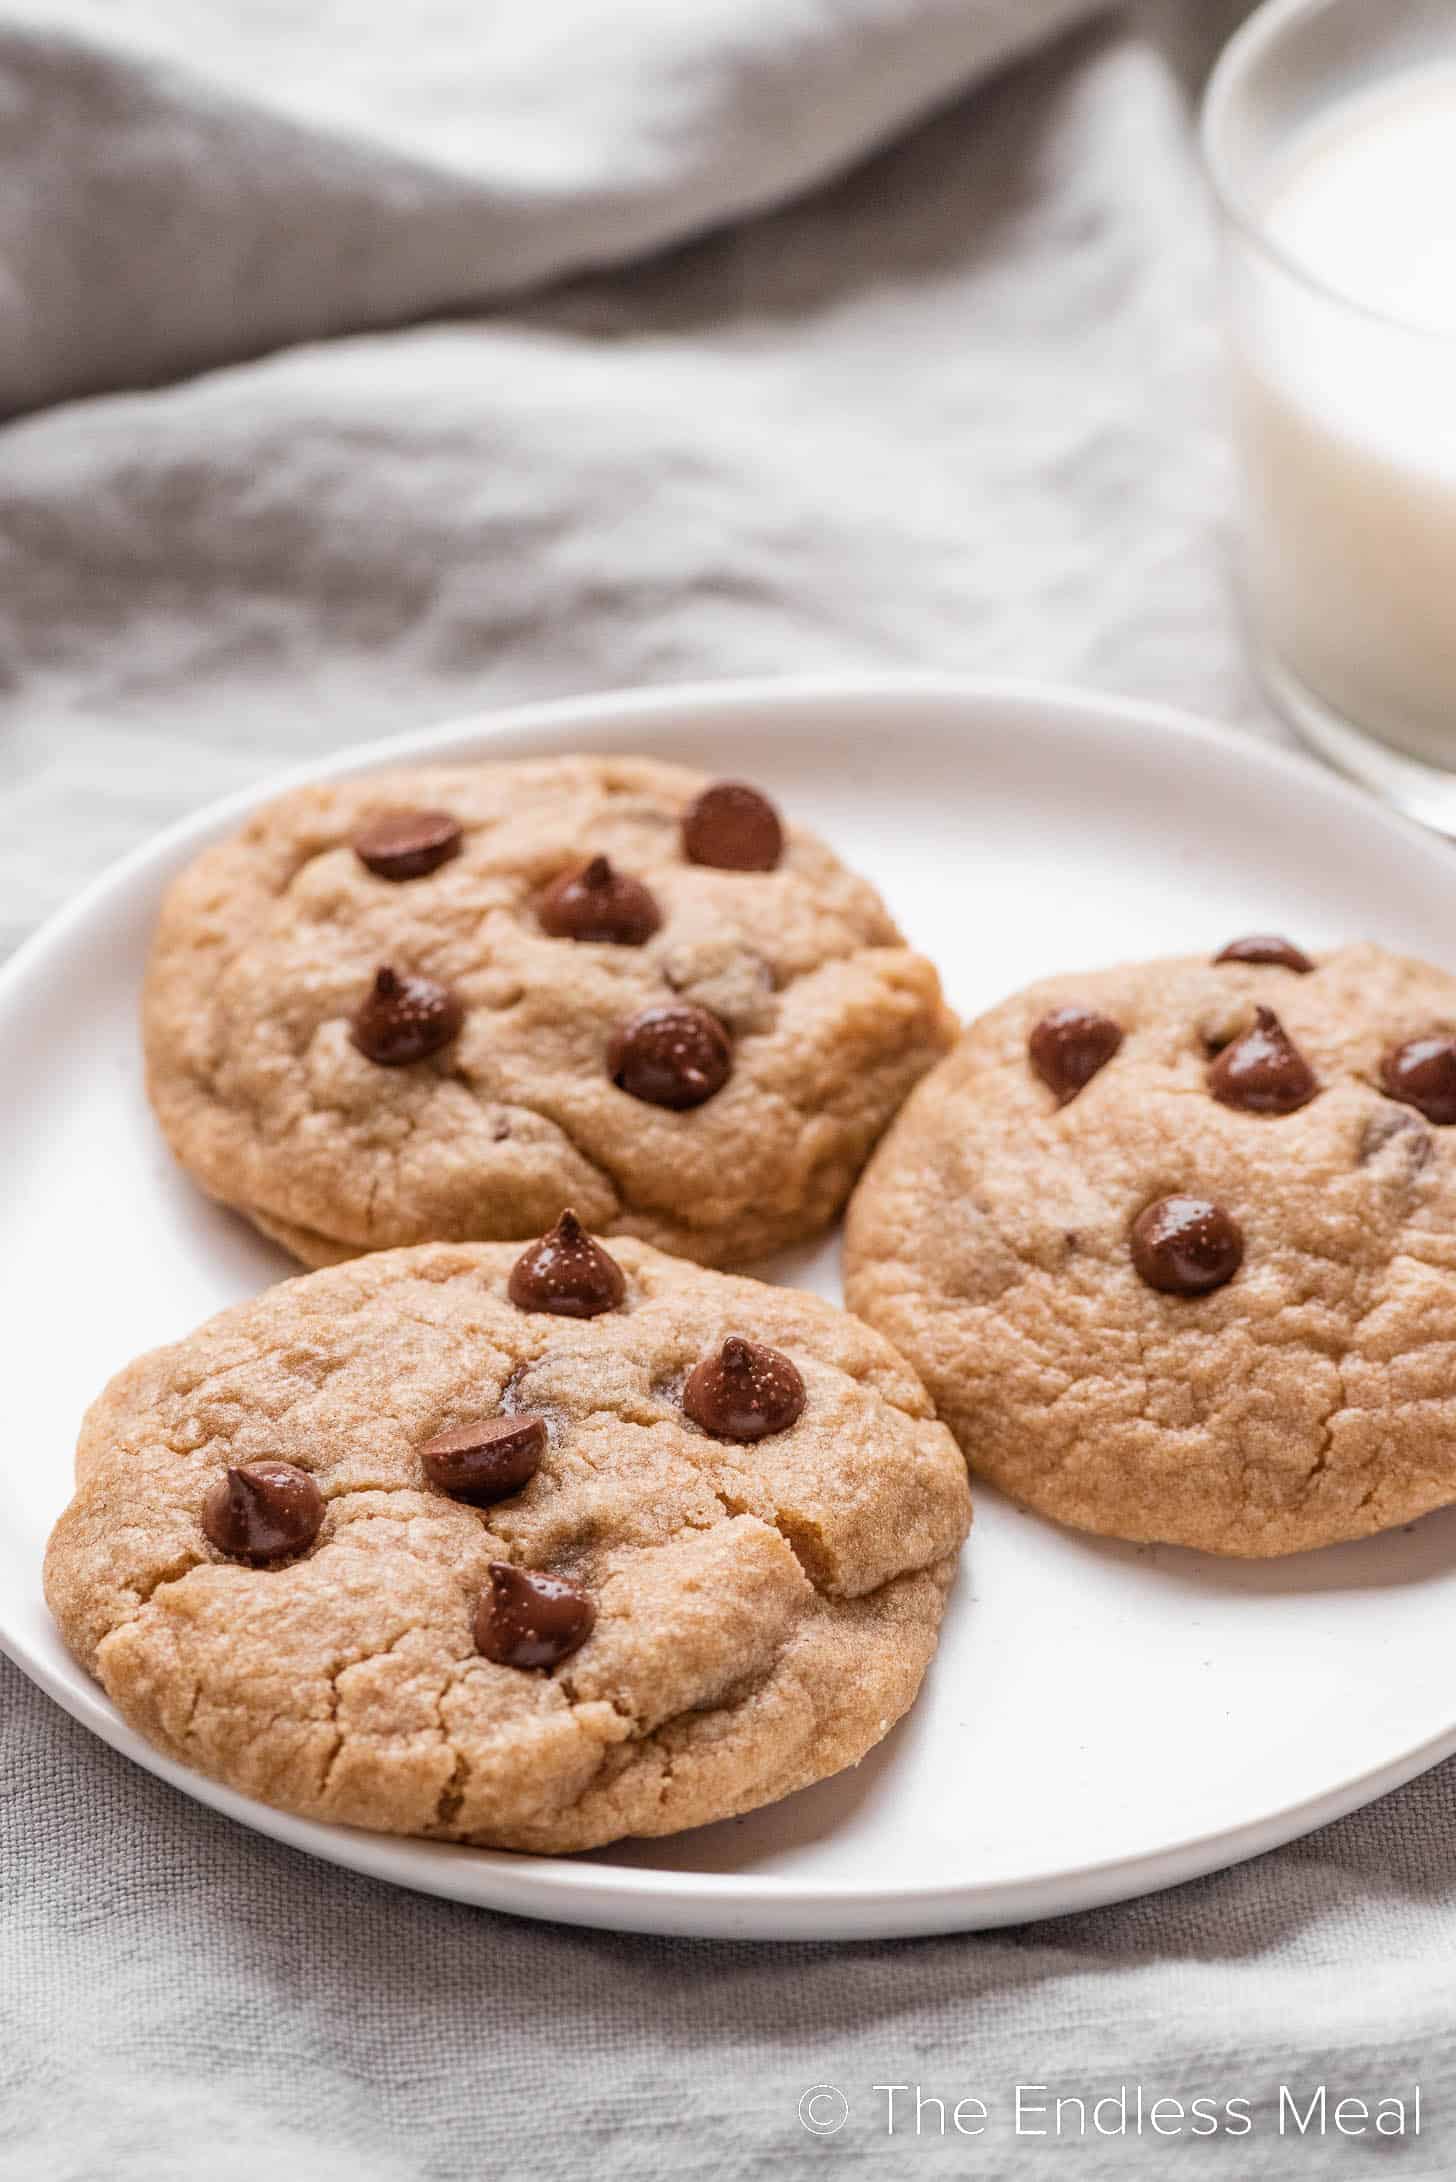 Whole Wheat Chocolate Chip Cookies on a plate next to a glass of milk.